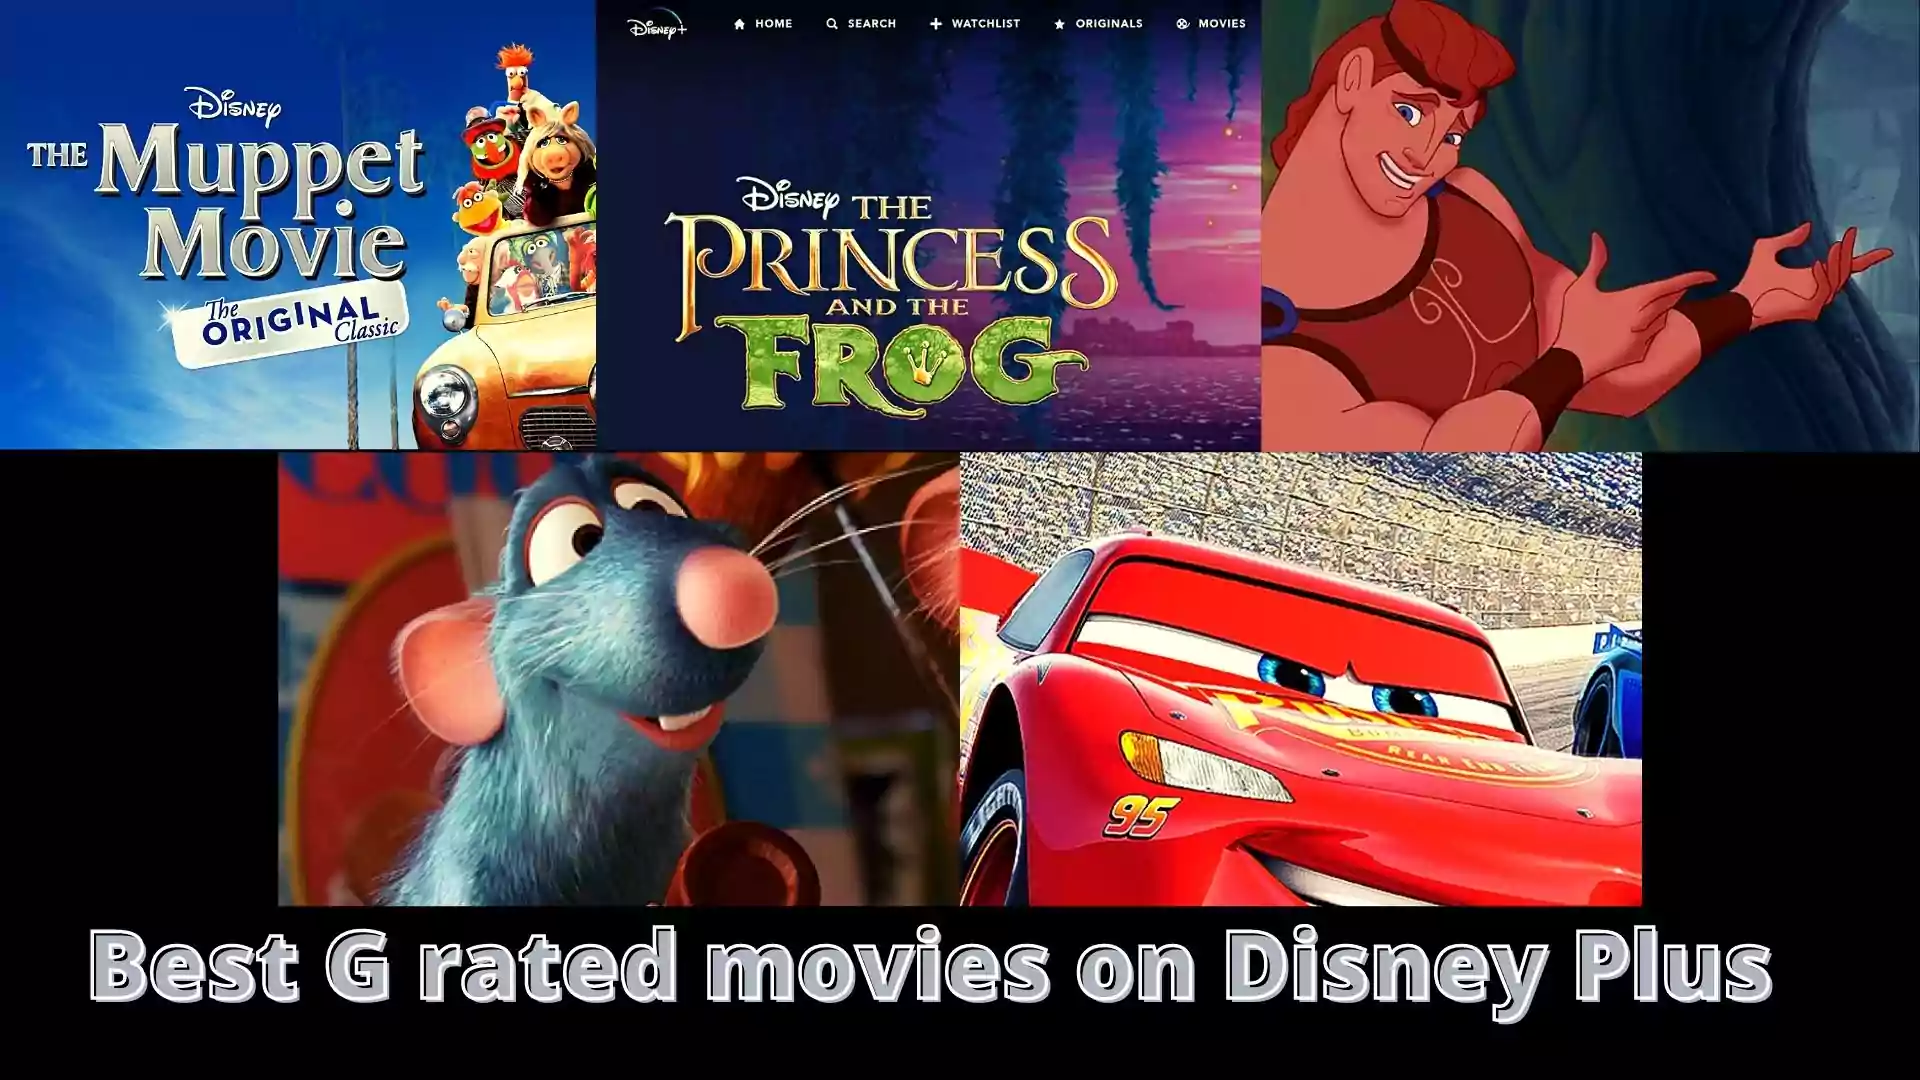 Best G rated movies on Disney Plus